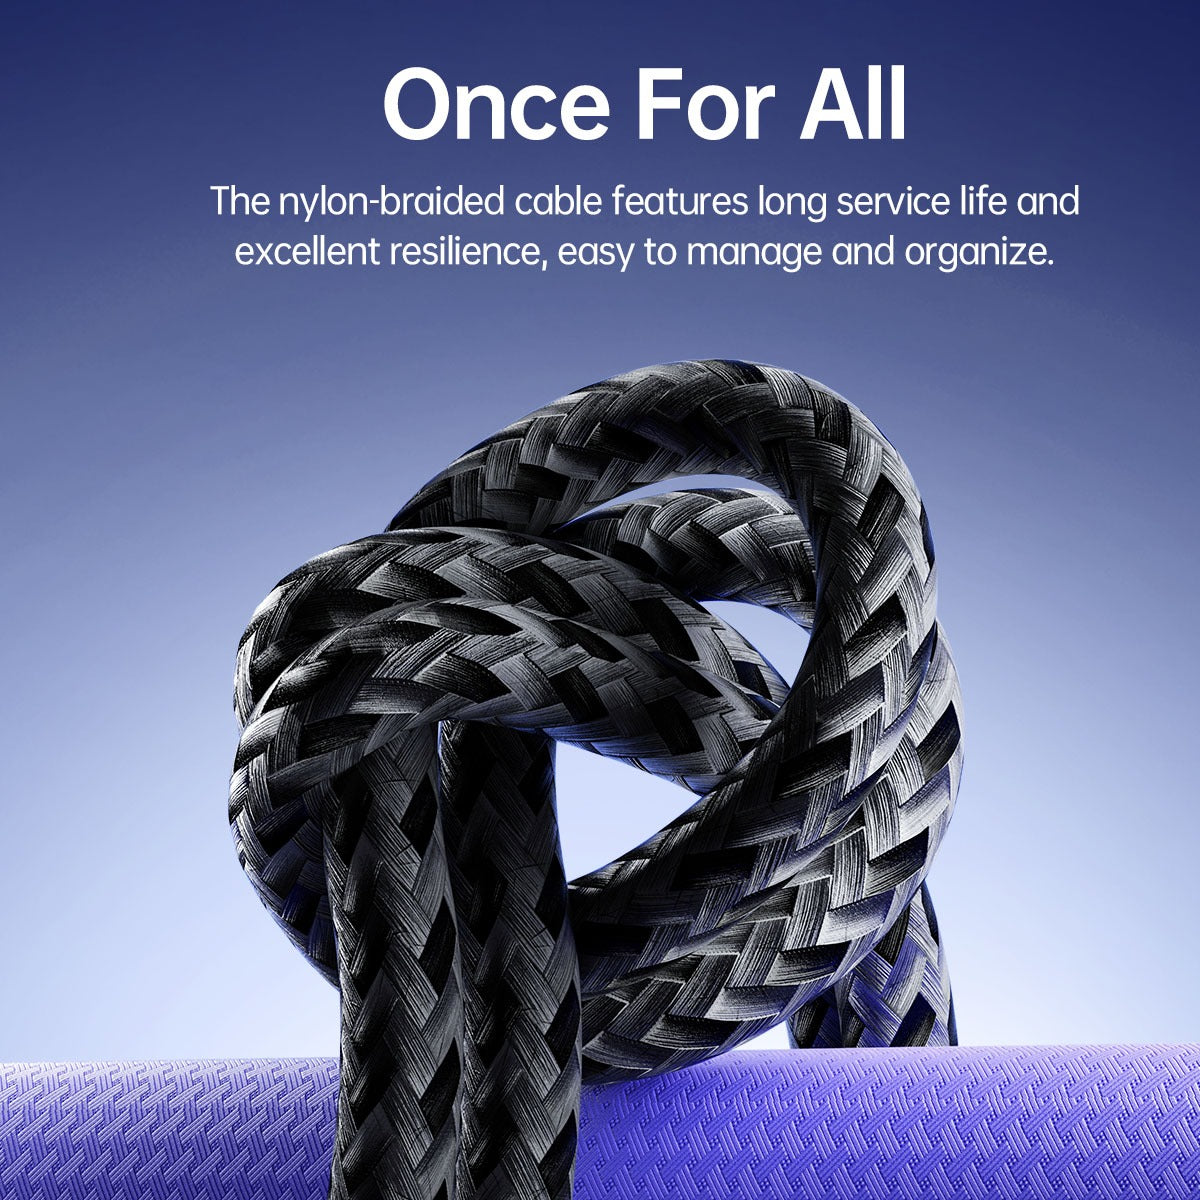 ORICO GQA100 (1m /1.5m / 2m) USB Type C to USB Type C Fast Charging Data Cable 20V/5A PD 100W, 480Mbps Transmission Rate, Nylon-Braided Aluminum Alloy for Smartphones, MacBook, Tablet, PC